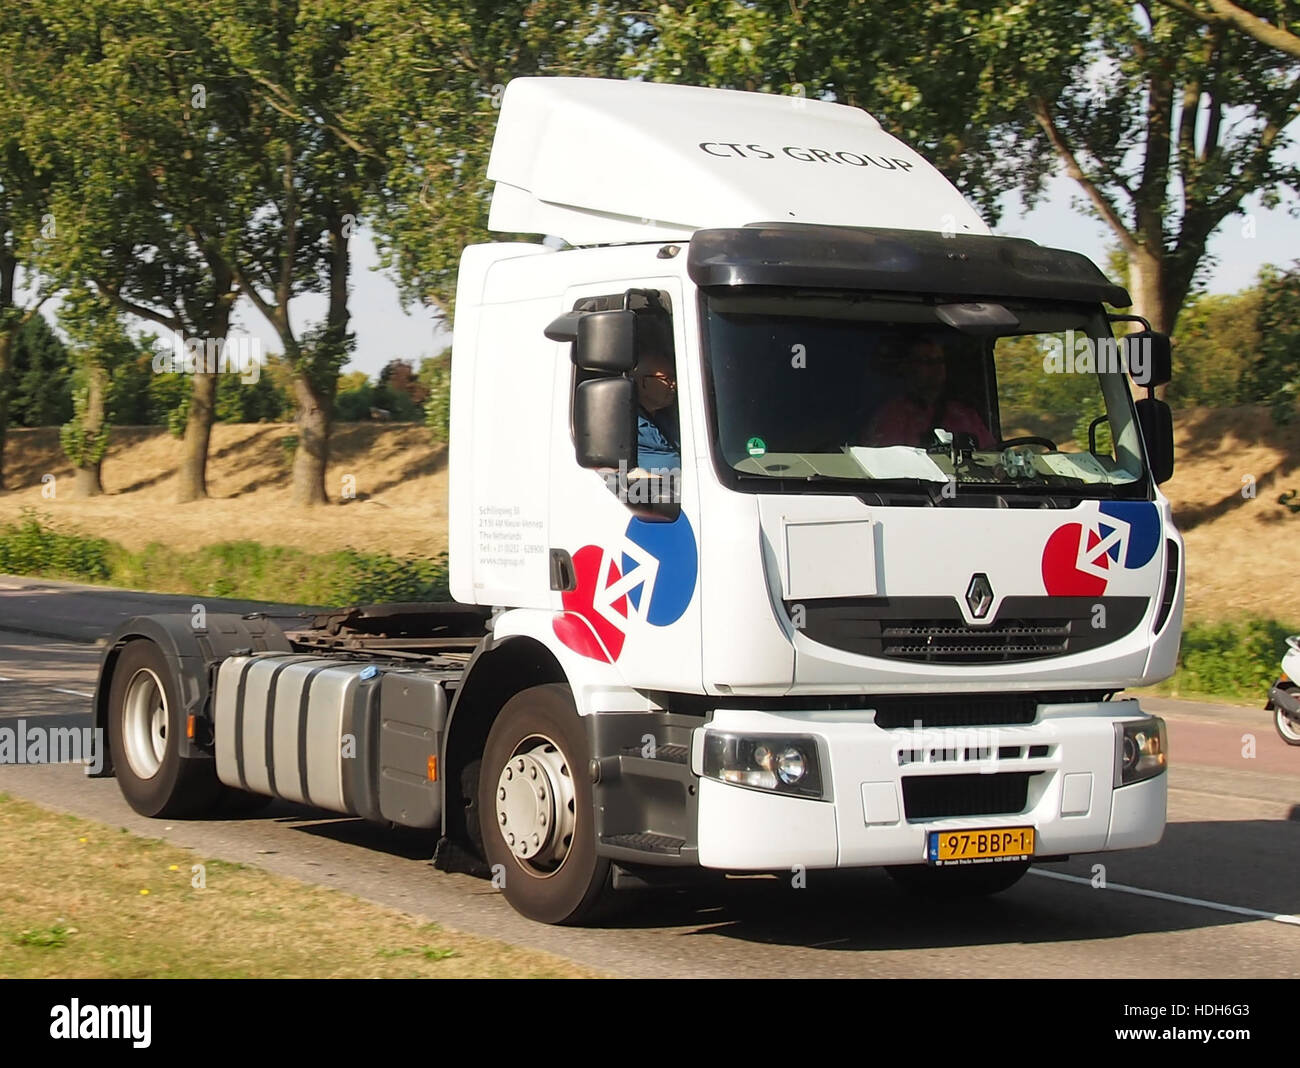 Renault, CTS Group, truckrun 2016 pic7 Stock Photo